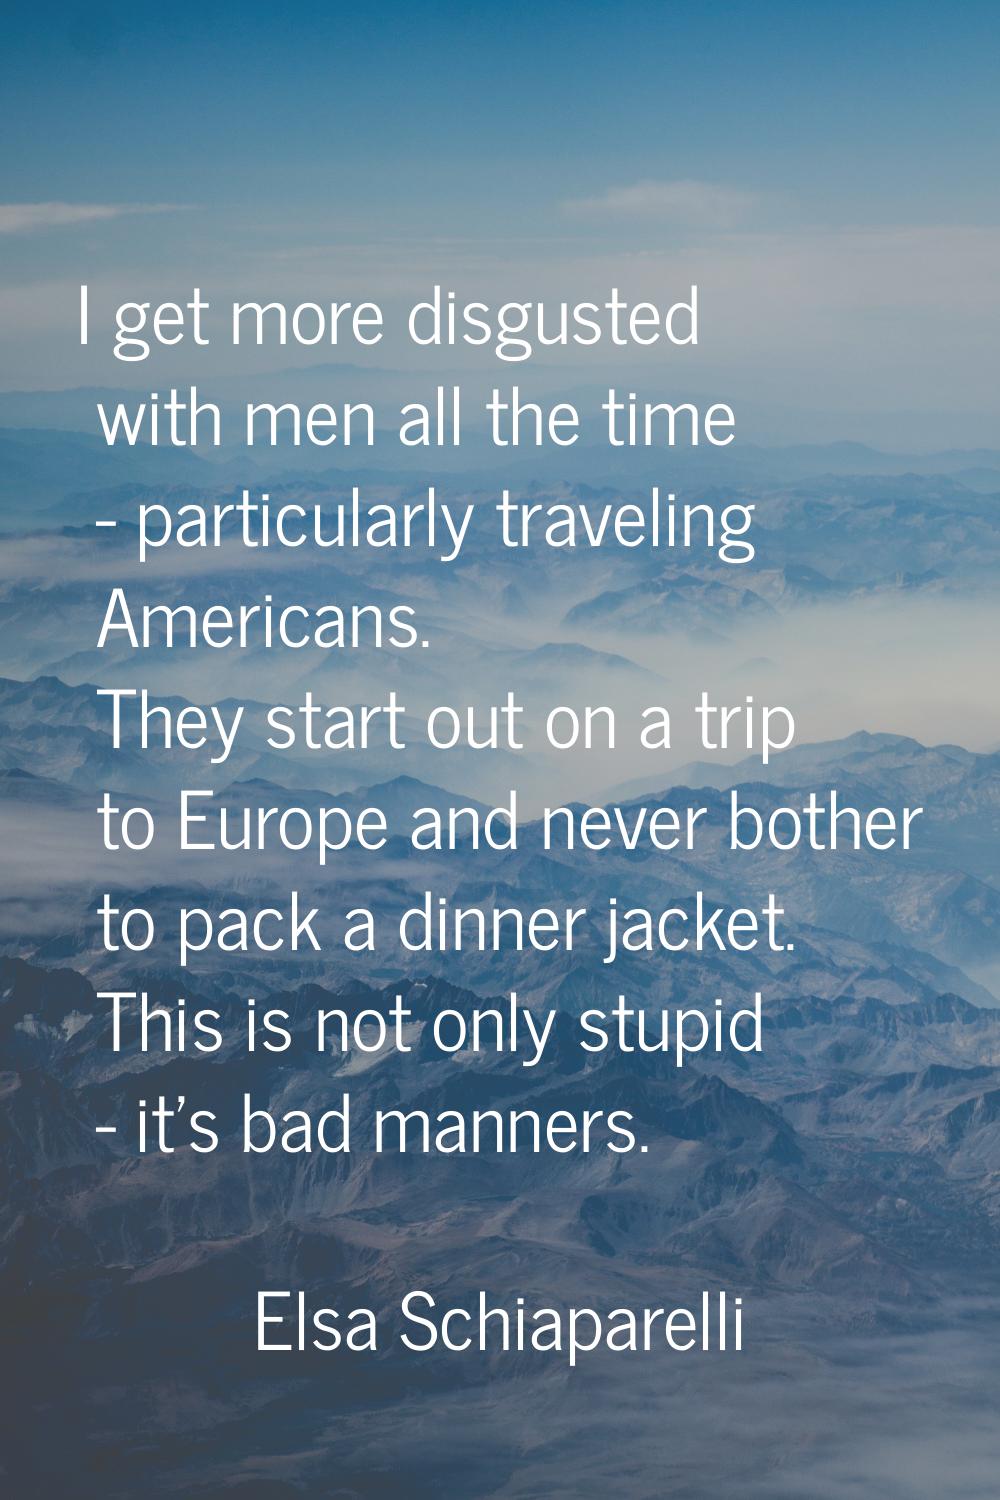 I get more disgusted with men all the time - particularly traveling Americans. They start out on a 